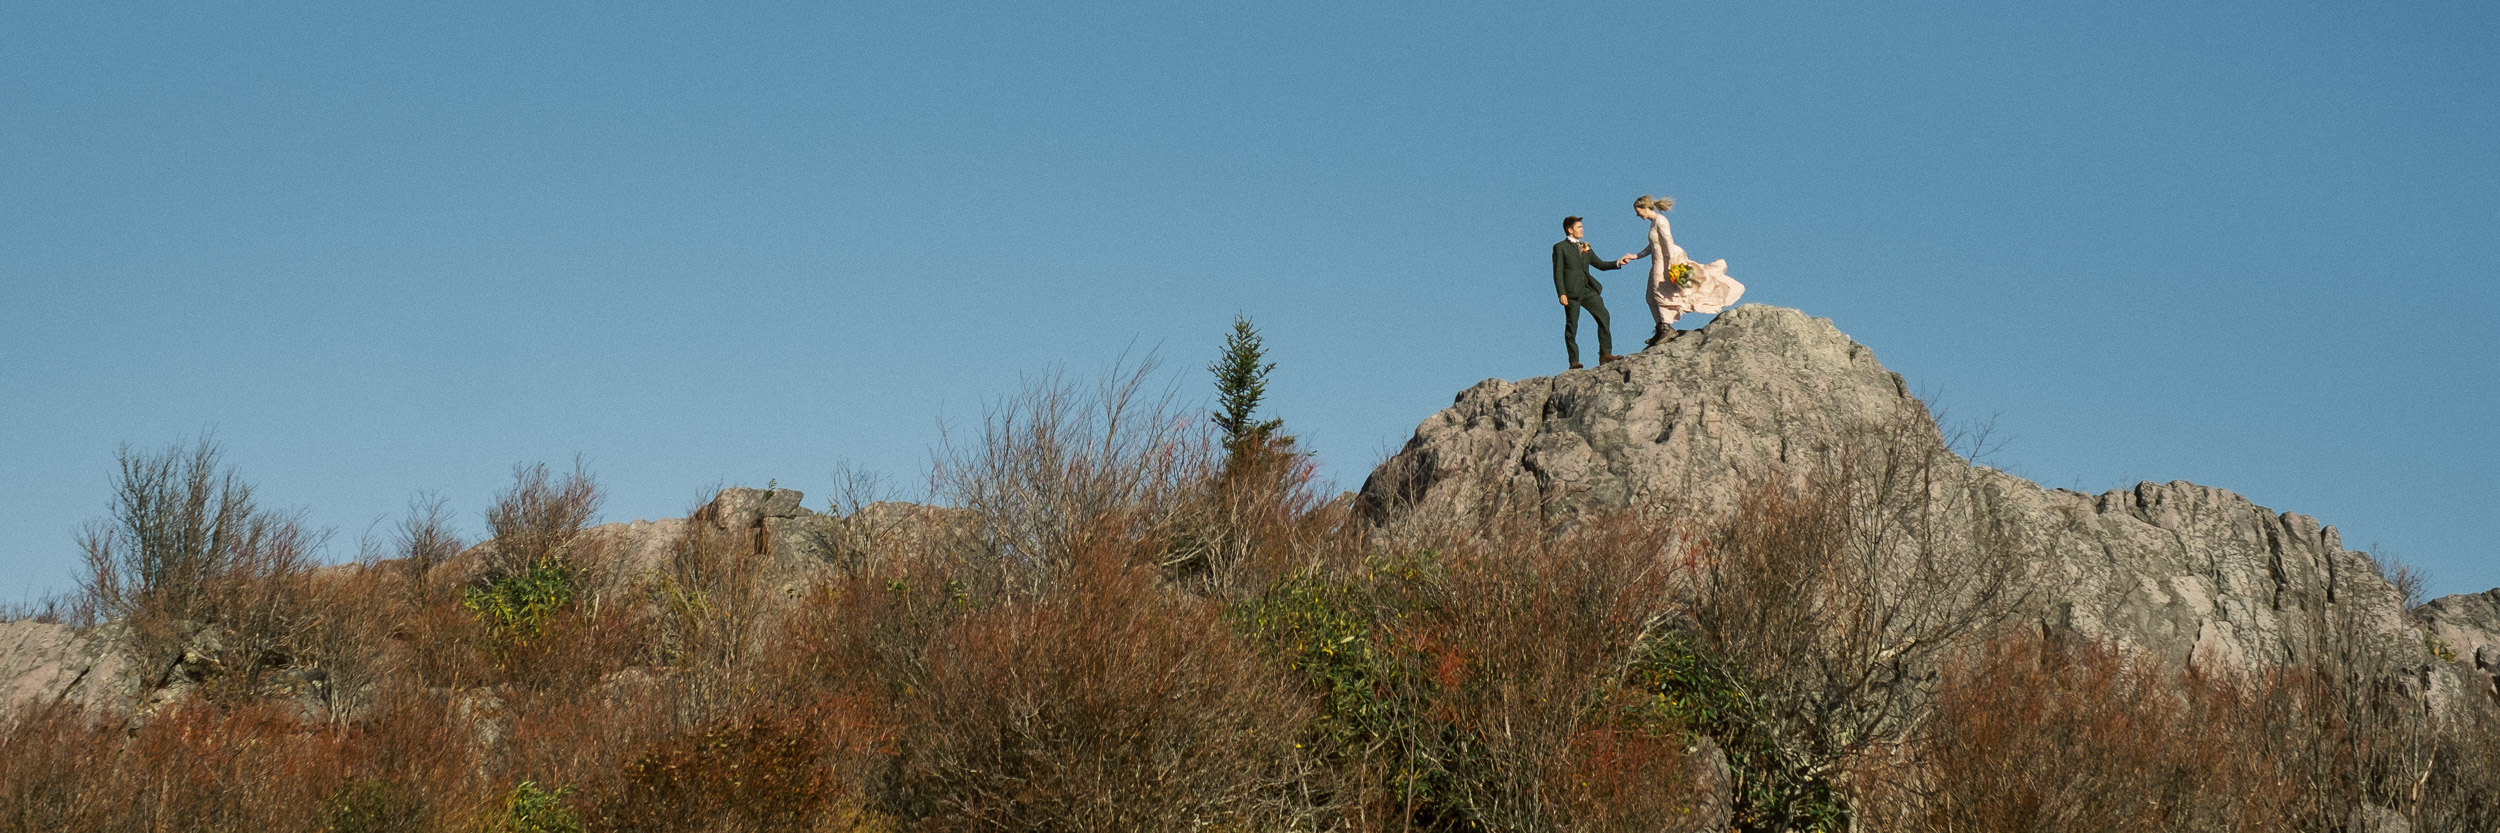 adventure wedding in Grayson highlands Virginia - bride and groom walking on cliff panorama